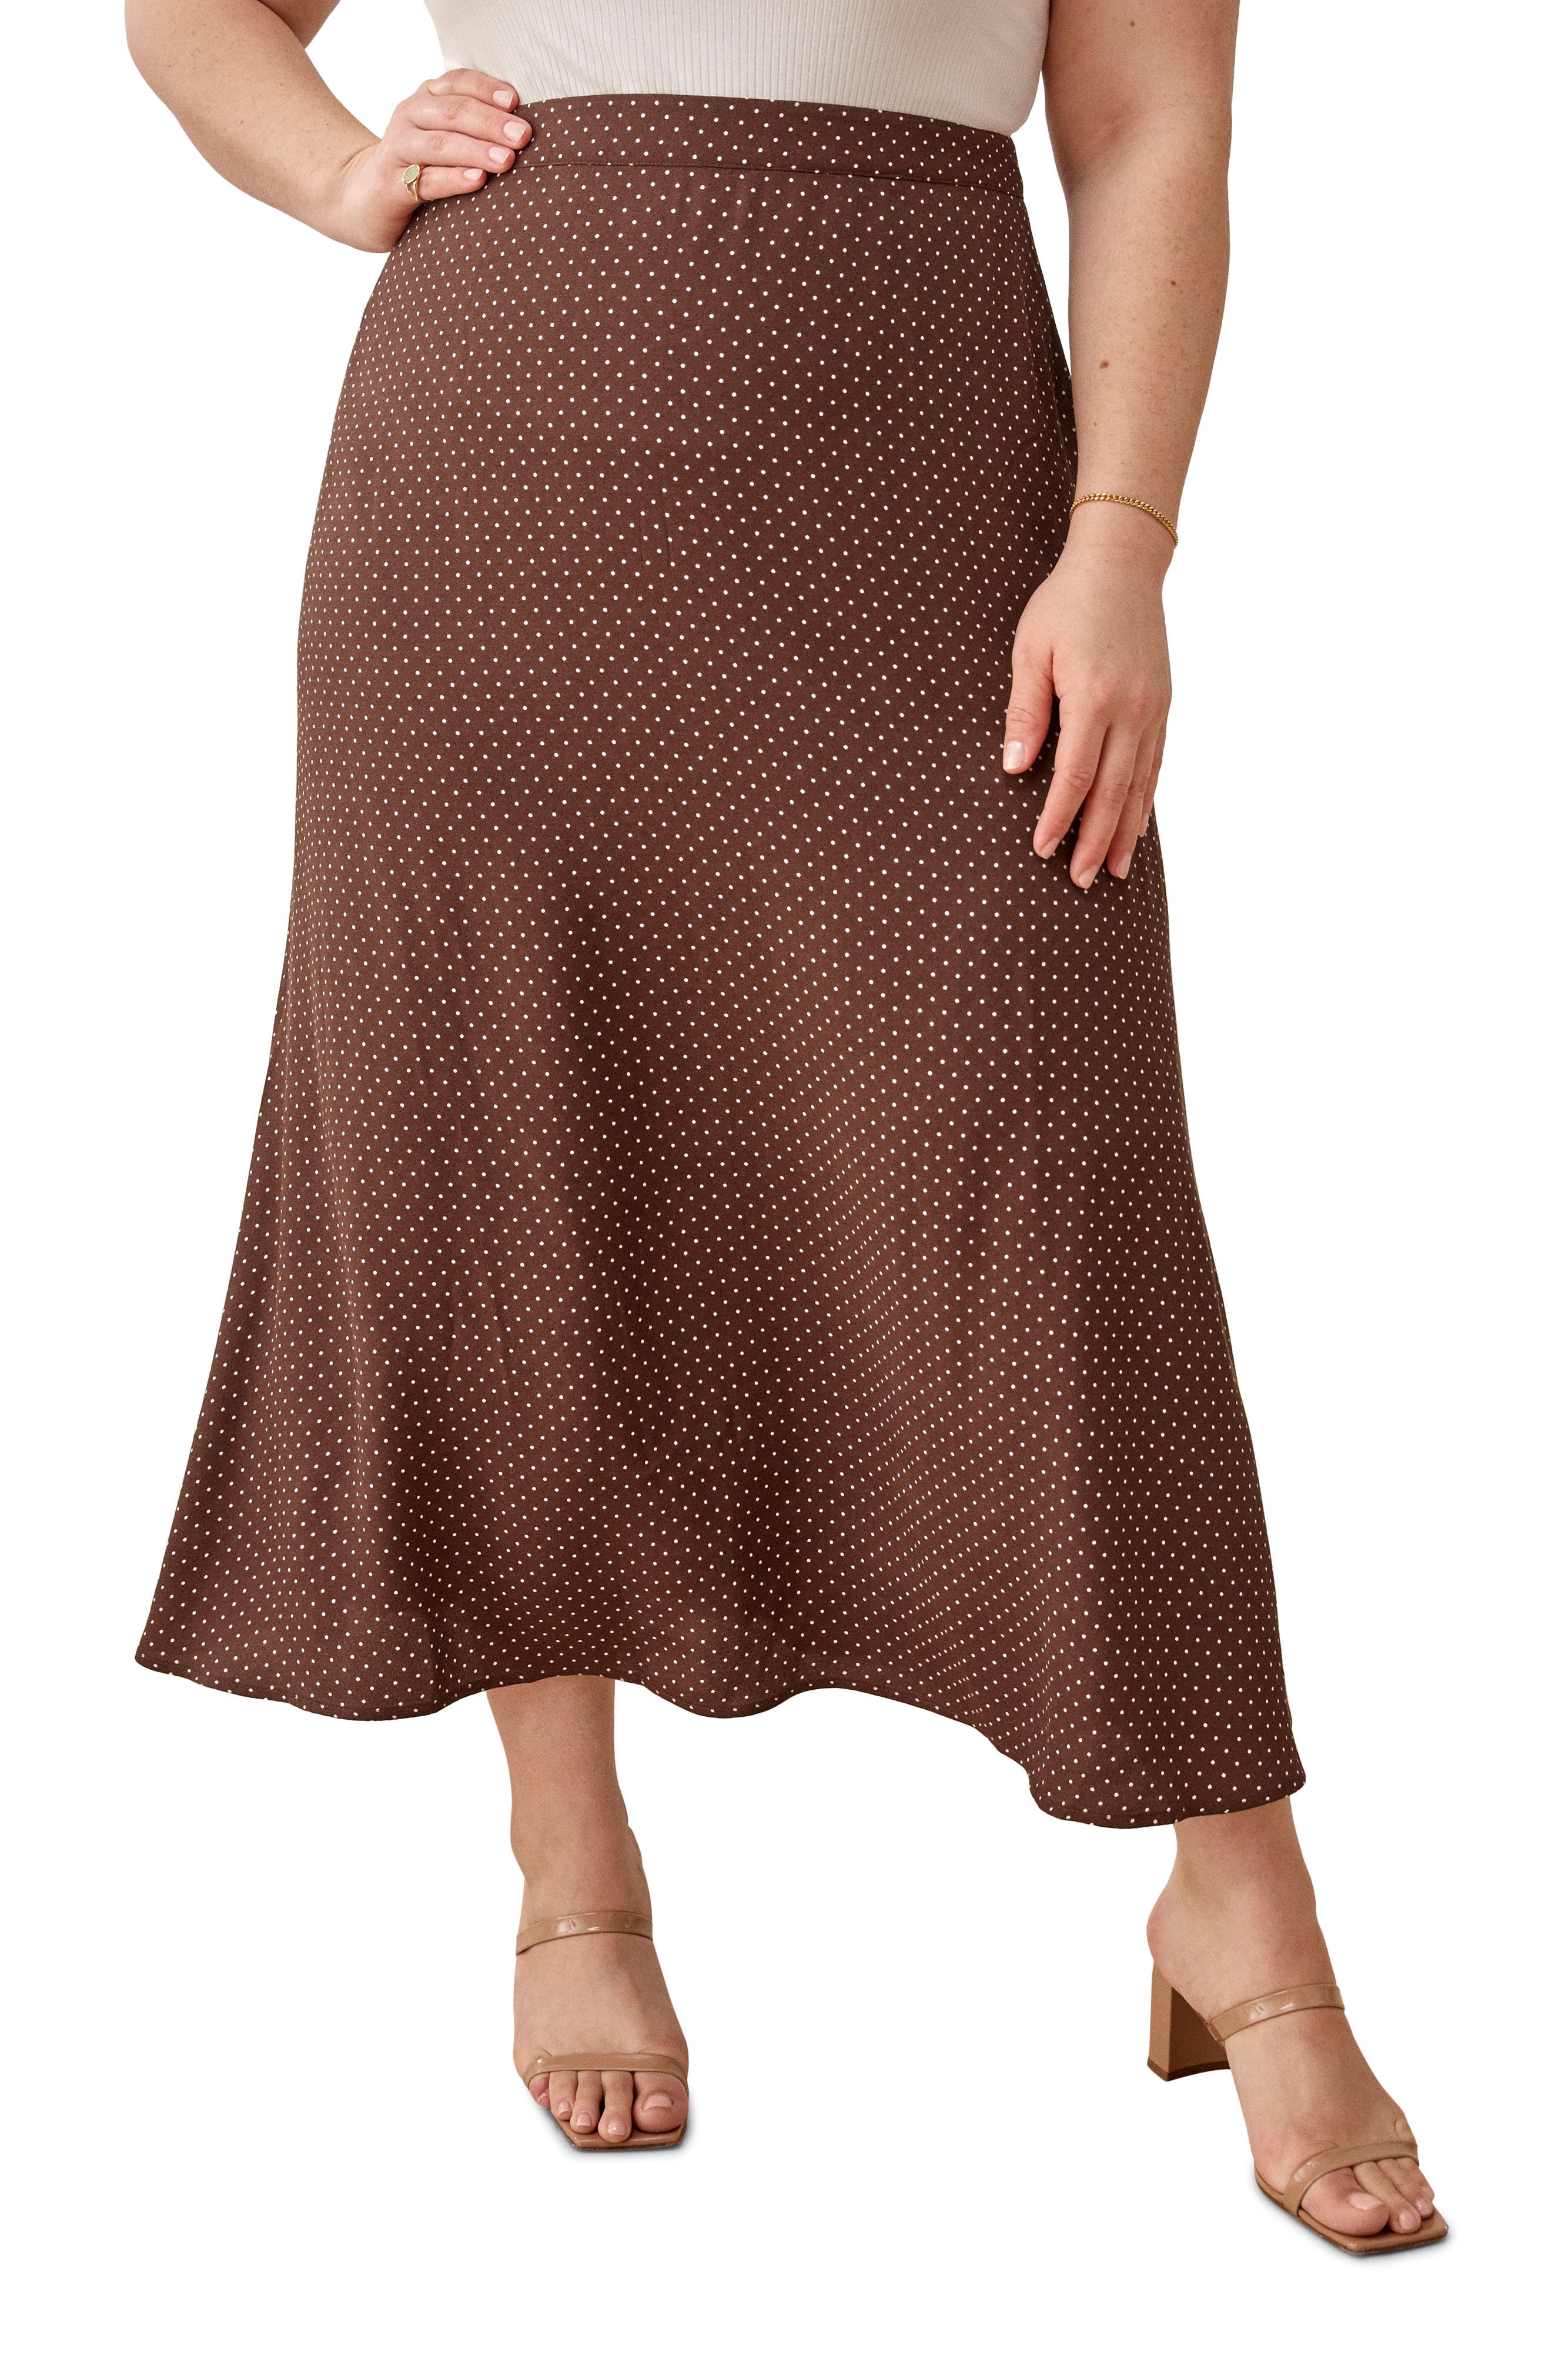 Reformation Bea Midi Skirt in Truffle at Nordstrom, Size 14W